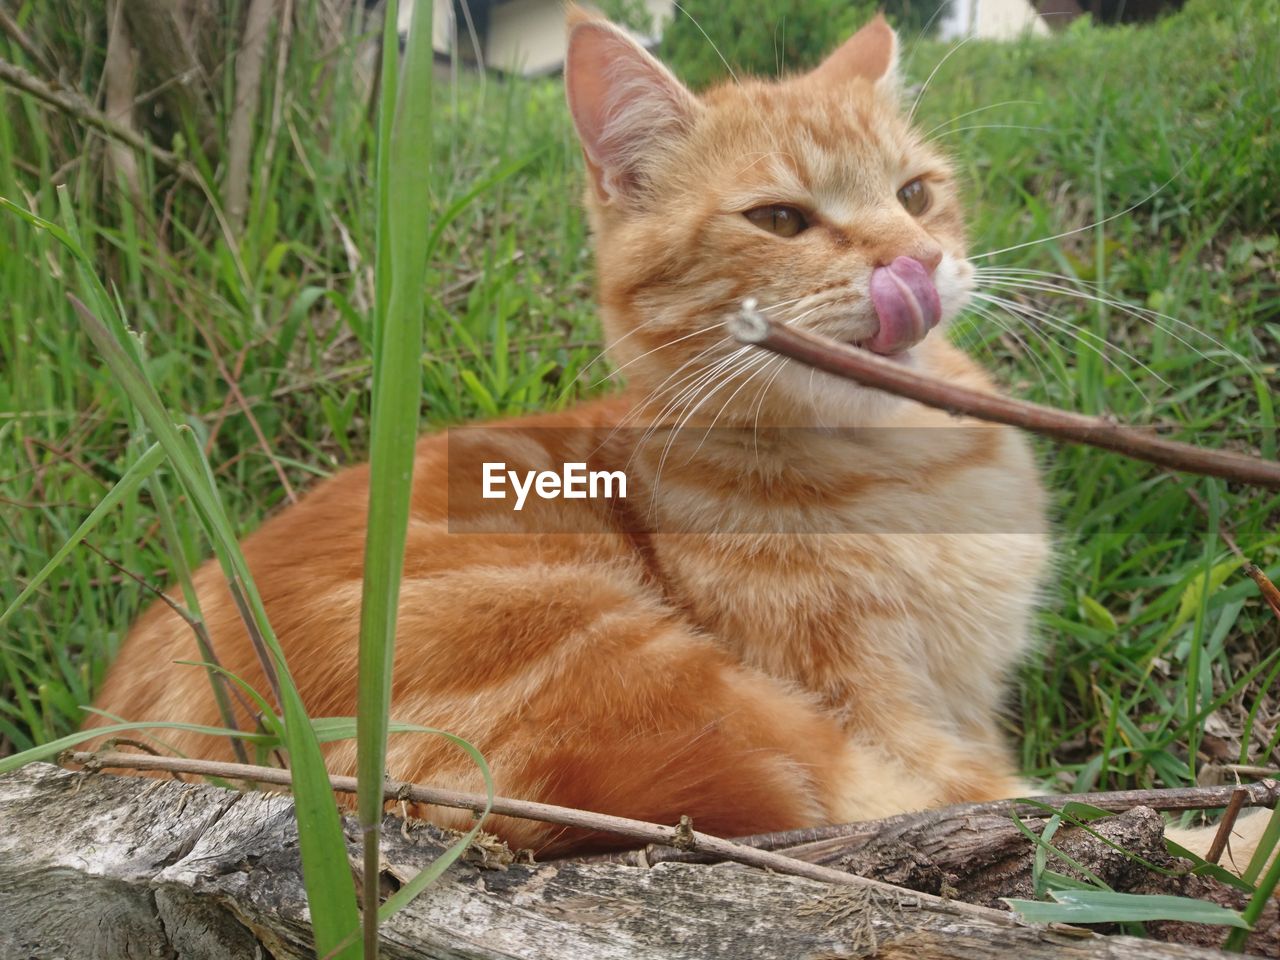 CLOSE-UP OF GINGER CAT SITTING ON GRASS